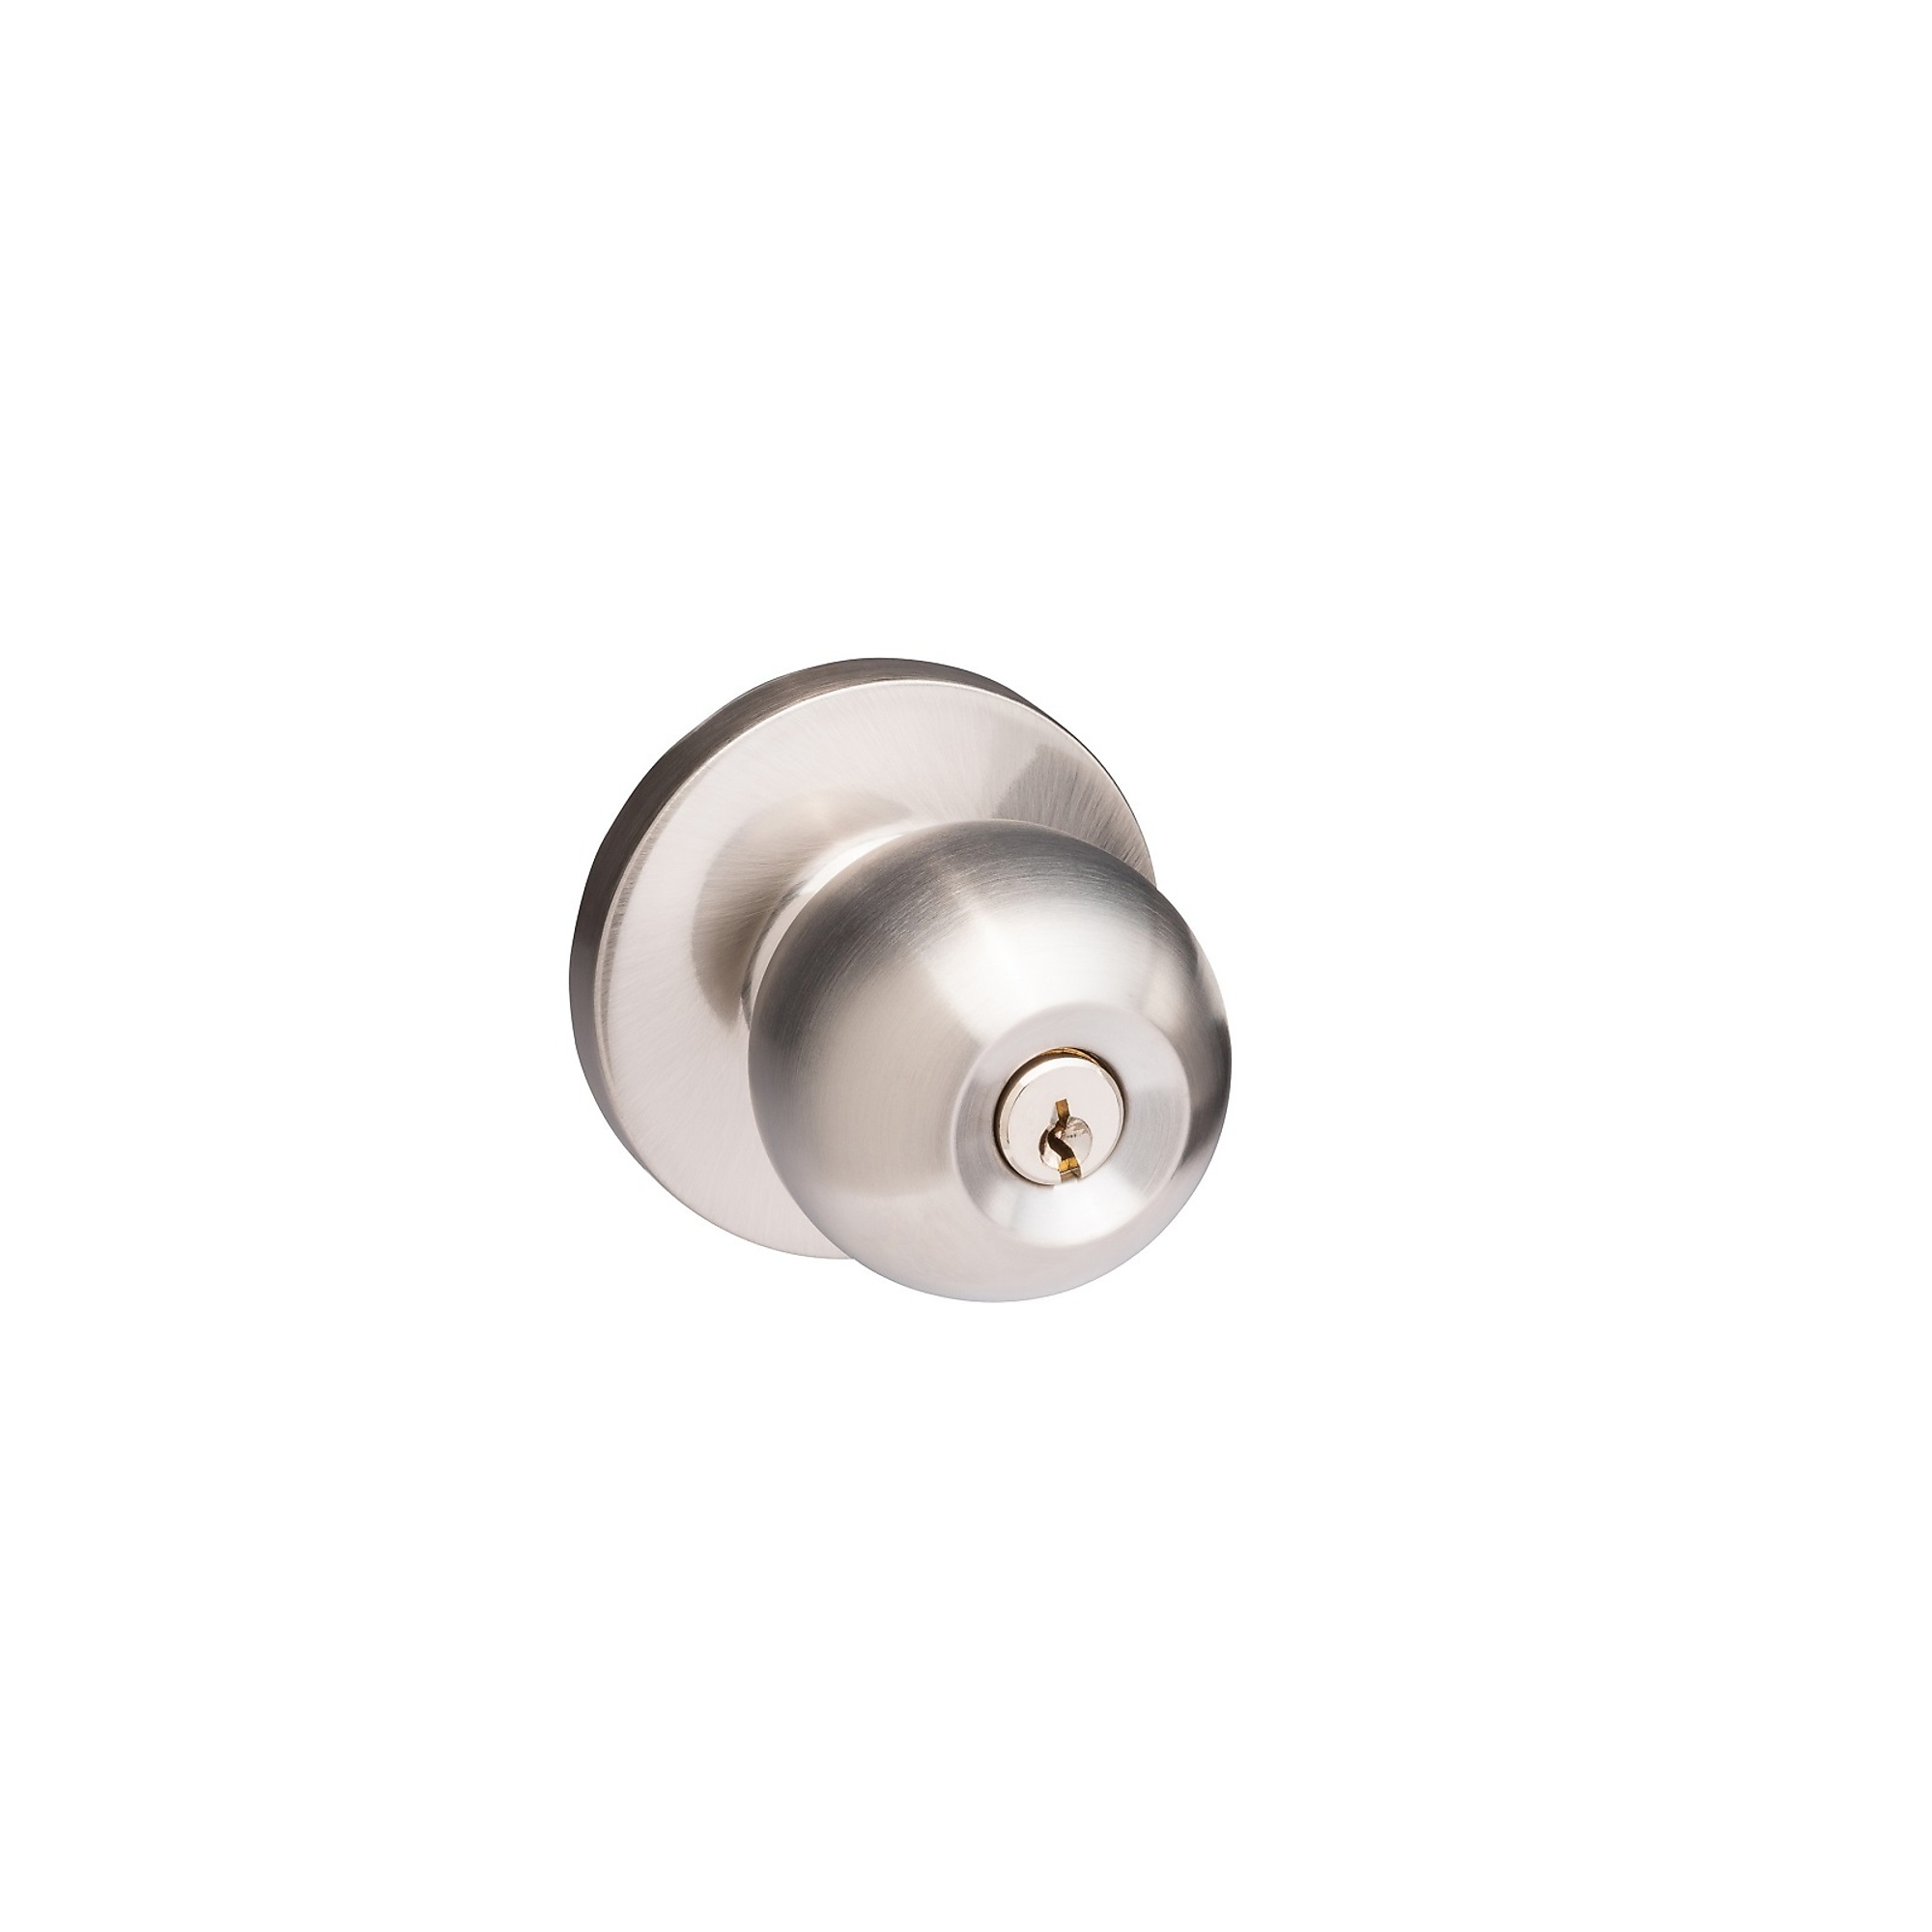 Trans Atlantic, Commercial Entry Ball Knob Trim with Lock for Exit Device, Max. Fits Door Width 48 in, MInch Fits Door Width 35 in, Model ED-BKL500-